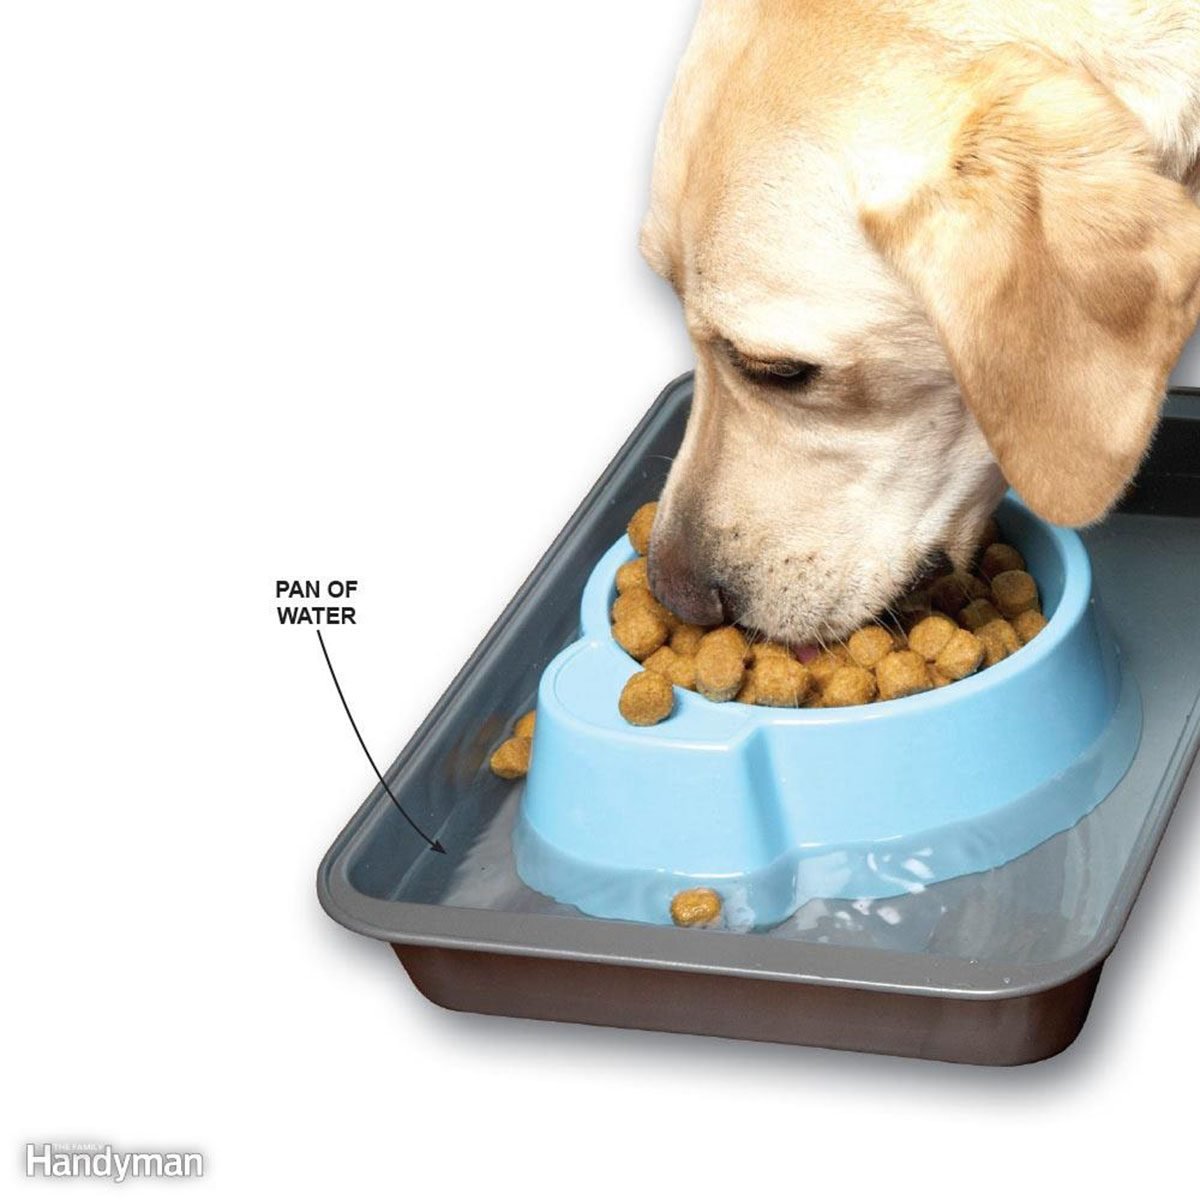 Dog eating food from a dish in a tray of water